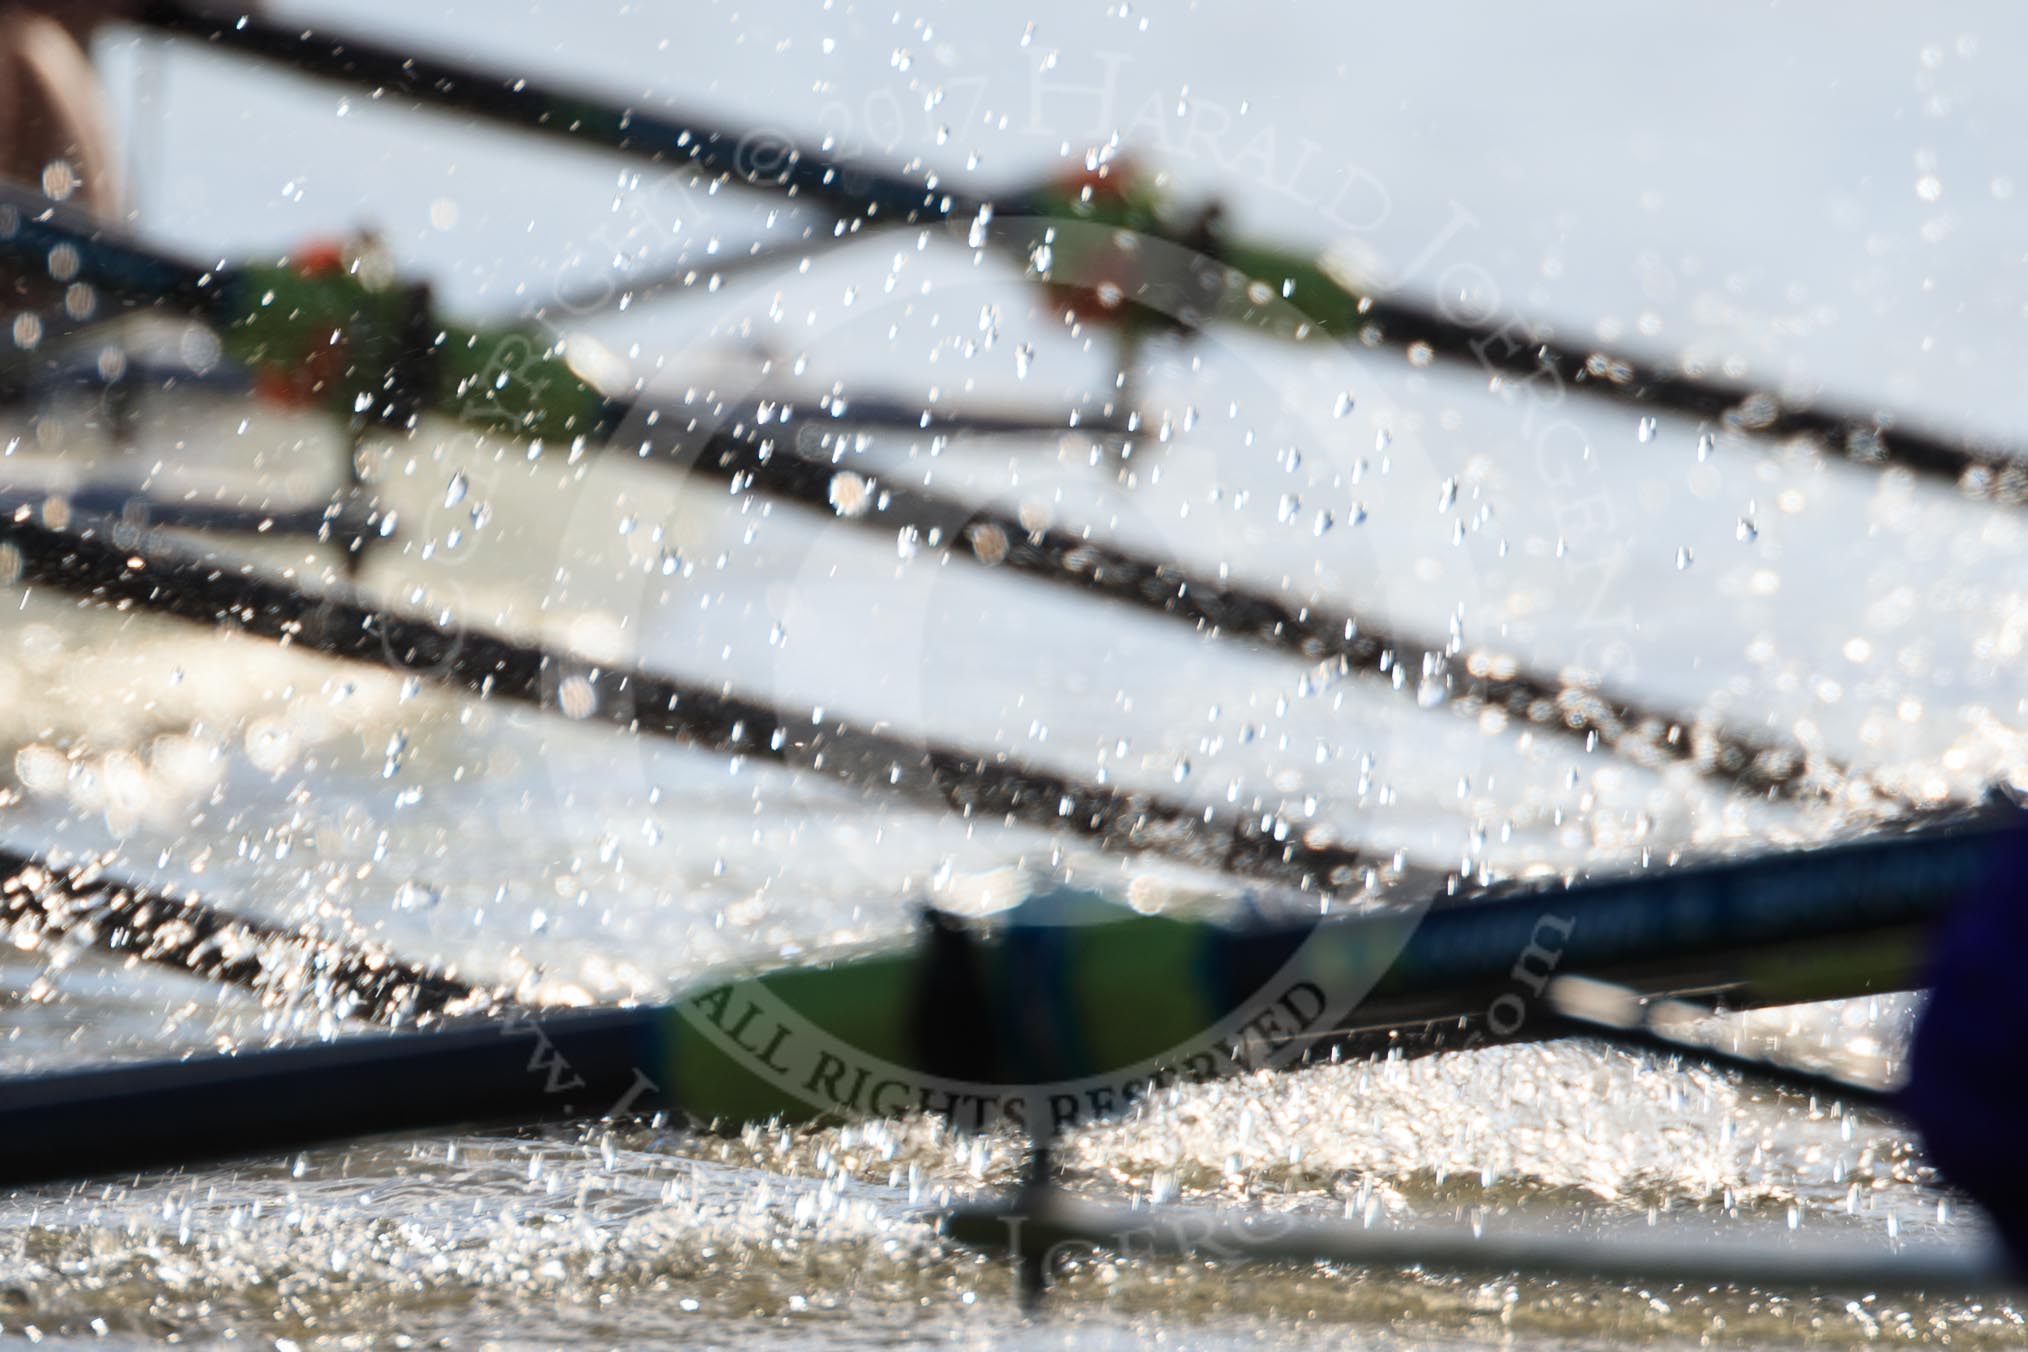 The Women's Boat Race season 2018 - fixture CUWBC vs. ULBC: OUWBC and ULBC during the early phase of the second race.
River Thames between Putney Bridge and Mortlake,
London SW15,

United Kingdom,
on 17 February 2018 at 13:30, image #130